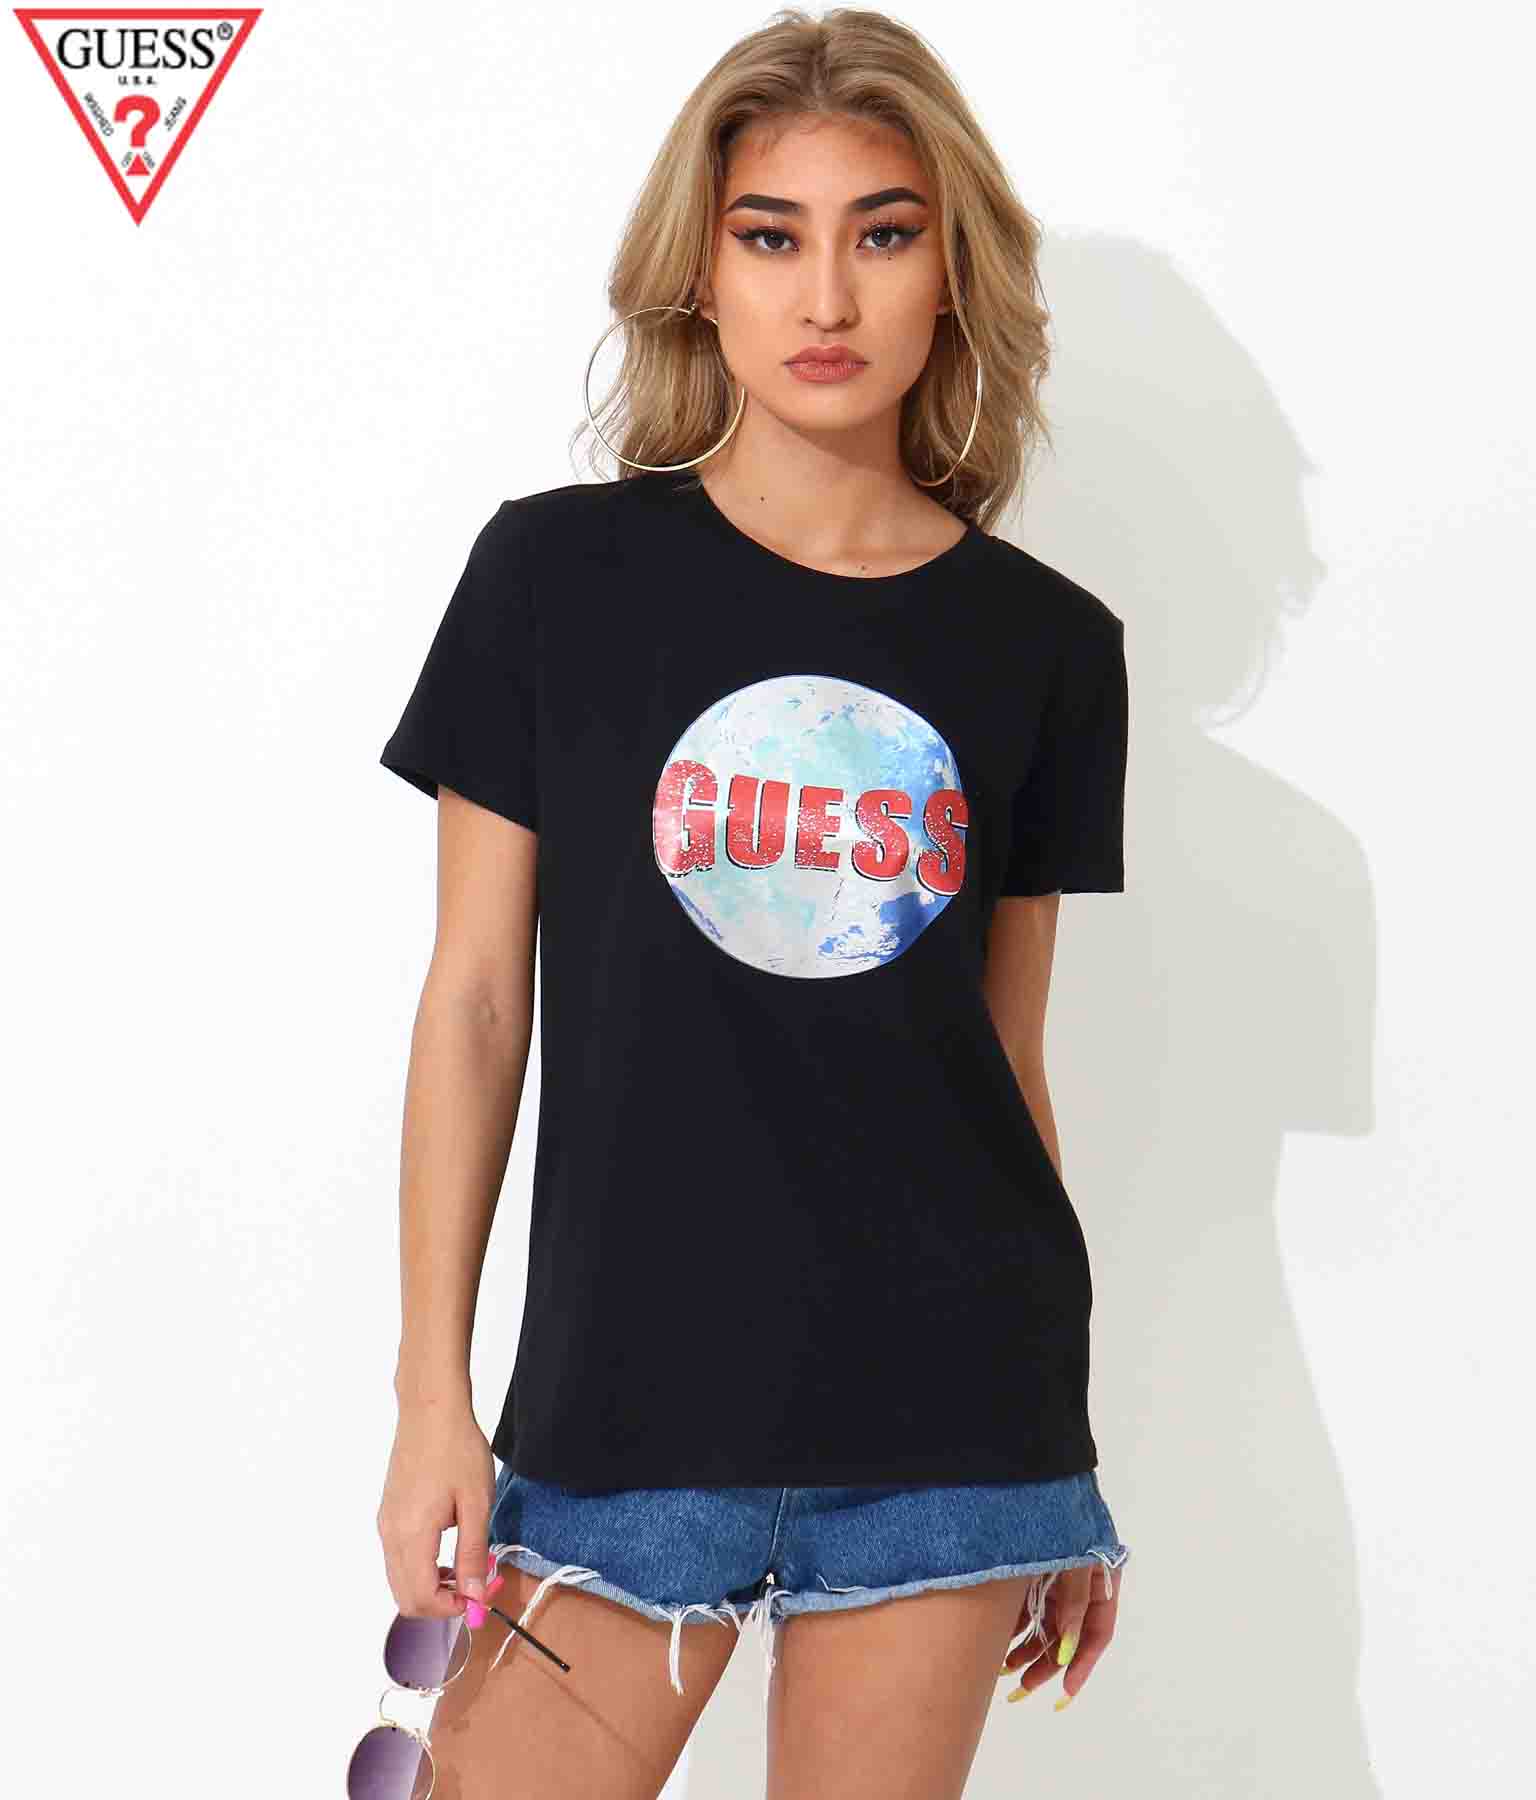 SS GUESS PLANET LOGO EASY TEE